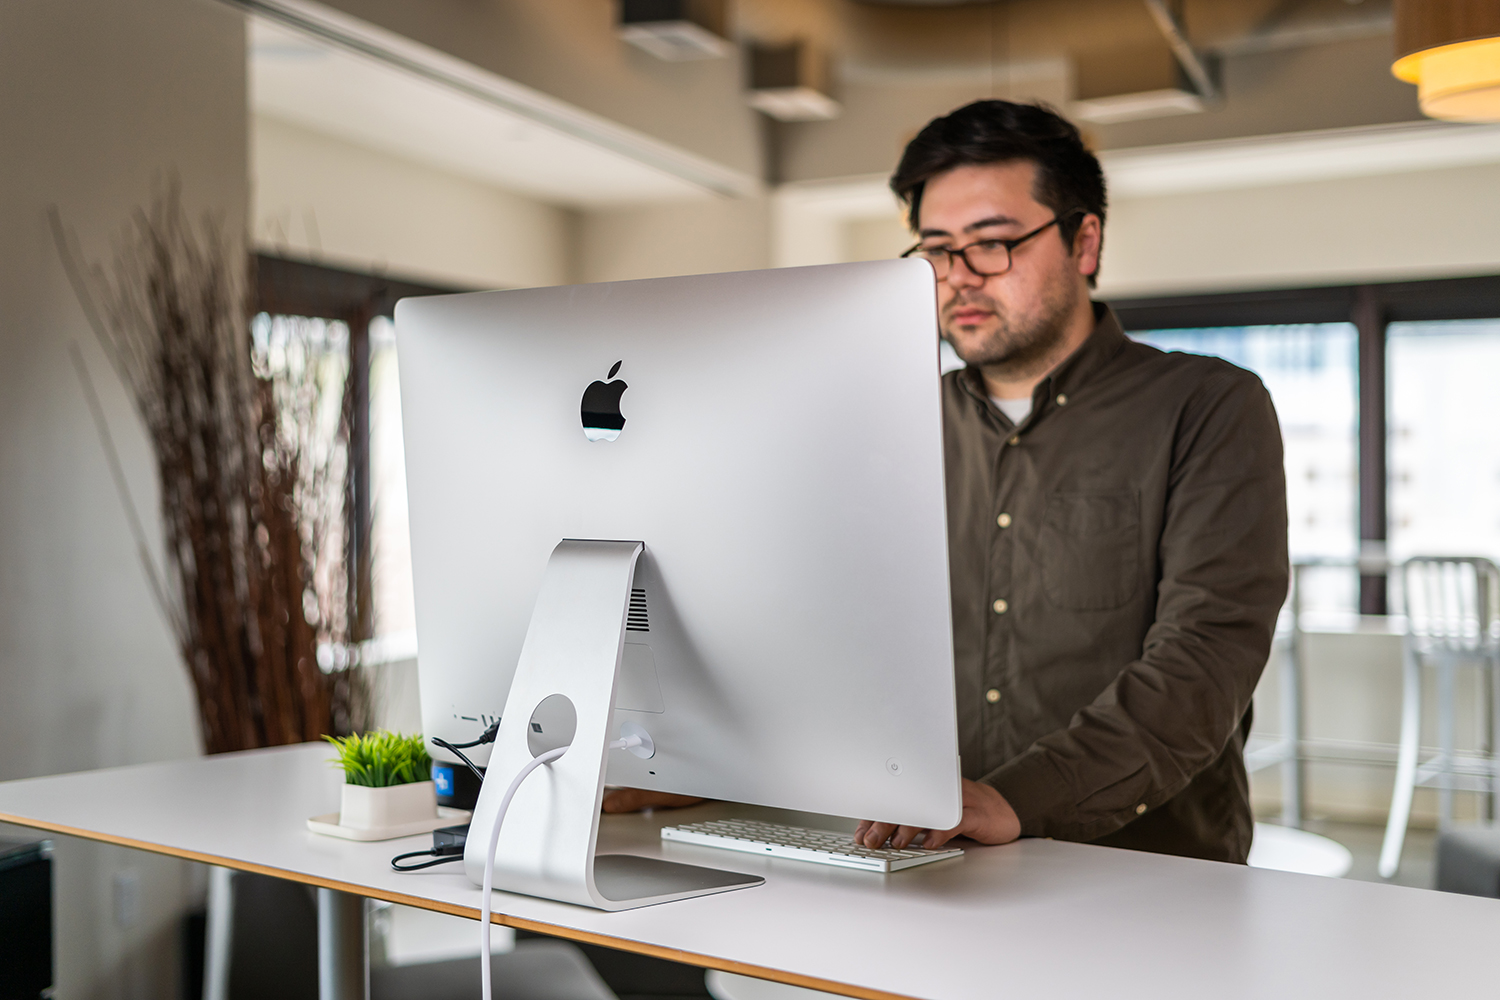 Apple iMac 5K 27-inch (2019) Review: Looks like 2012, Performs ...